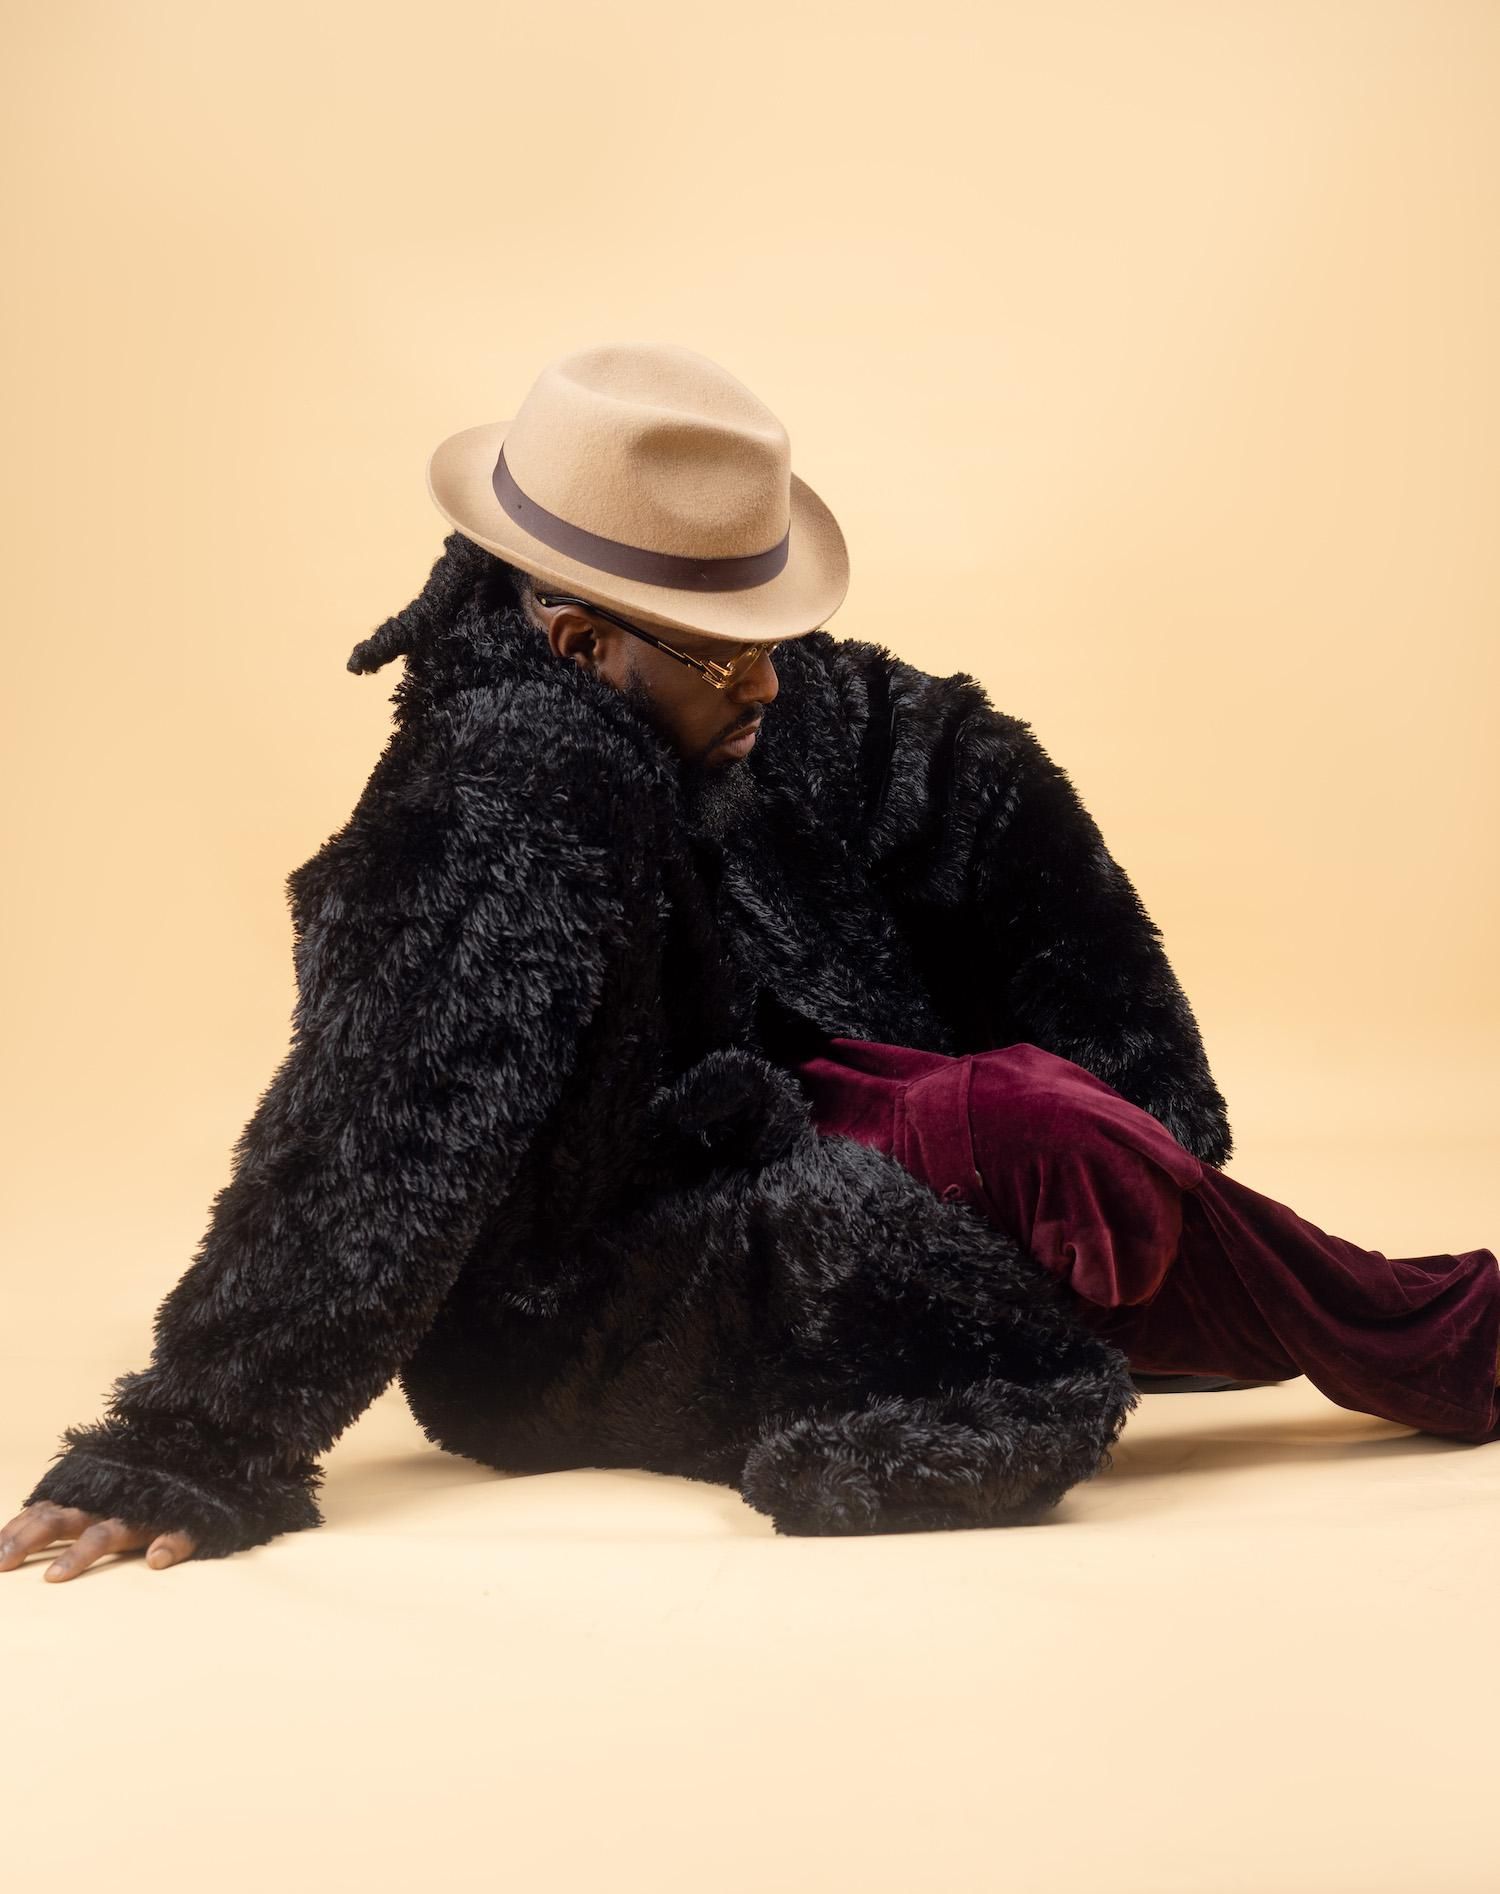 Nigerian artist Timaya sits in a yellow background with a black fur coat.